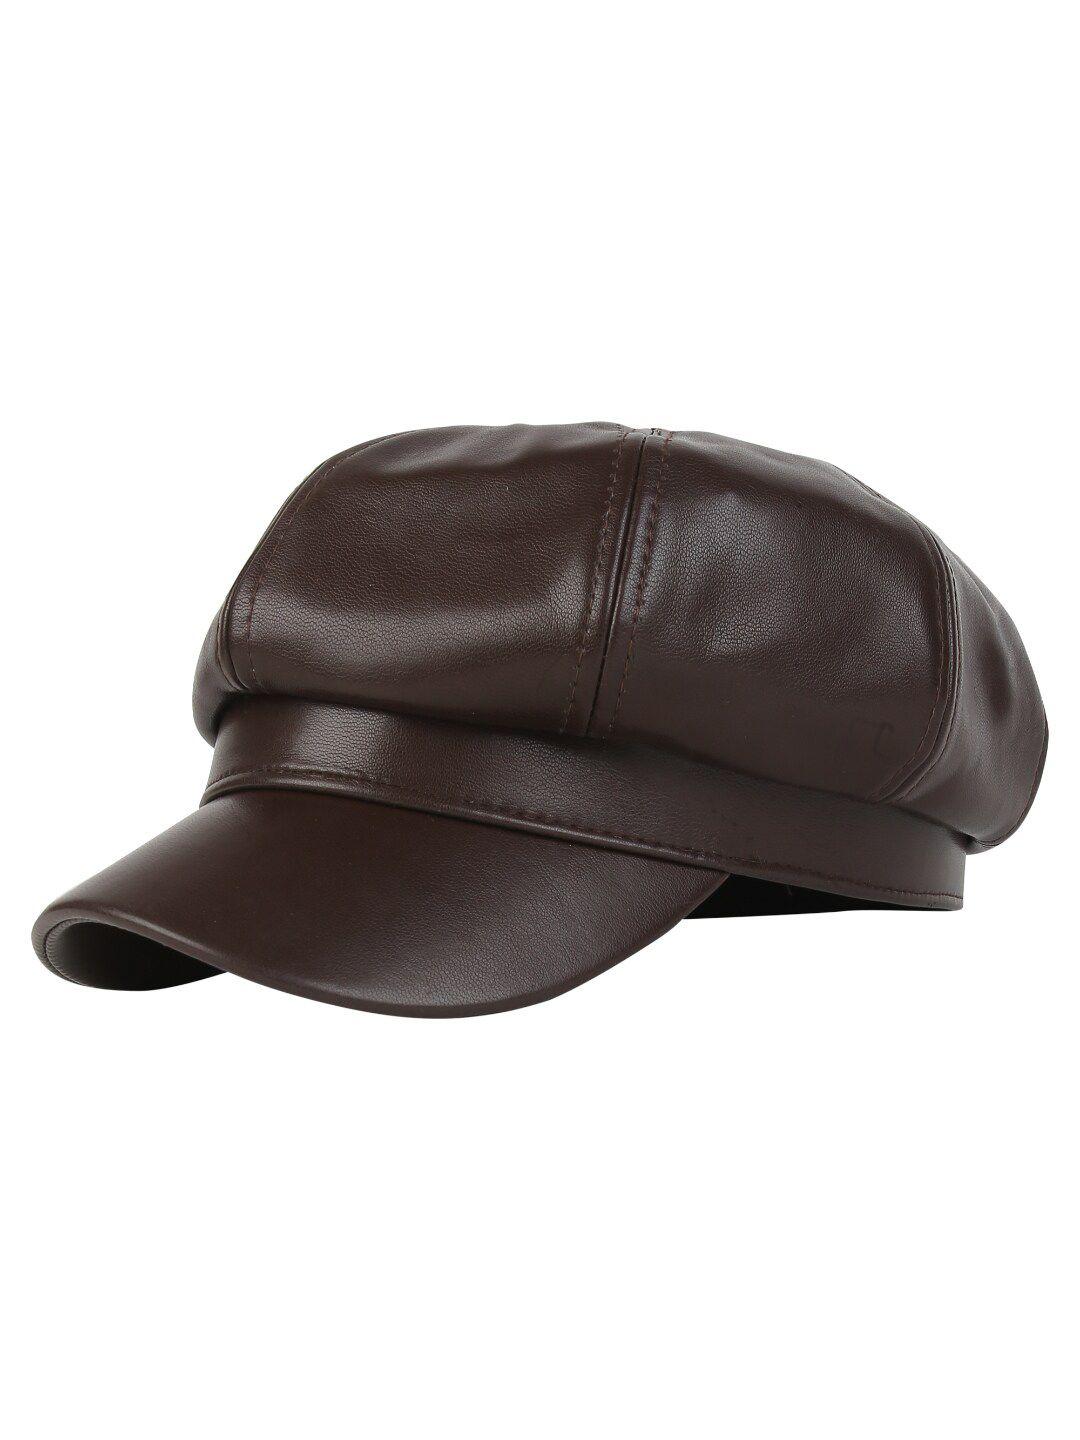 isweven unisex brown ascot beret french cap